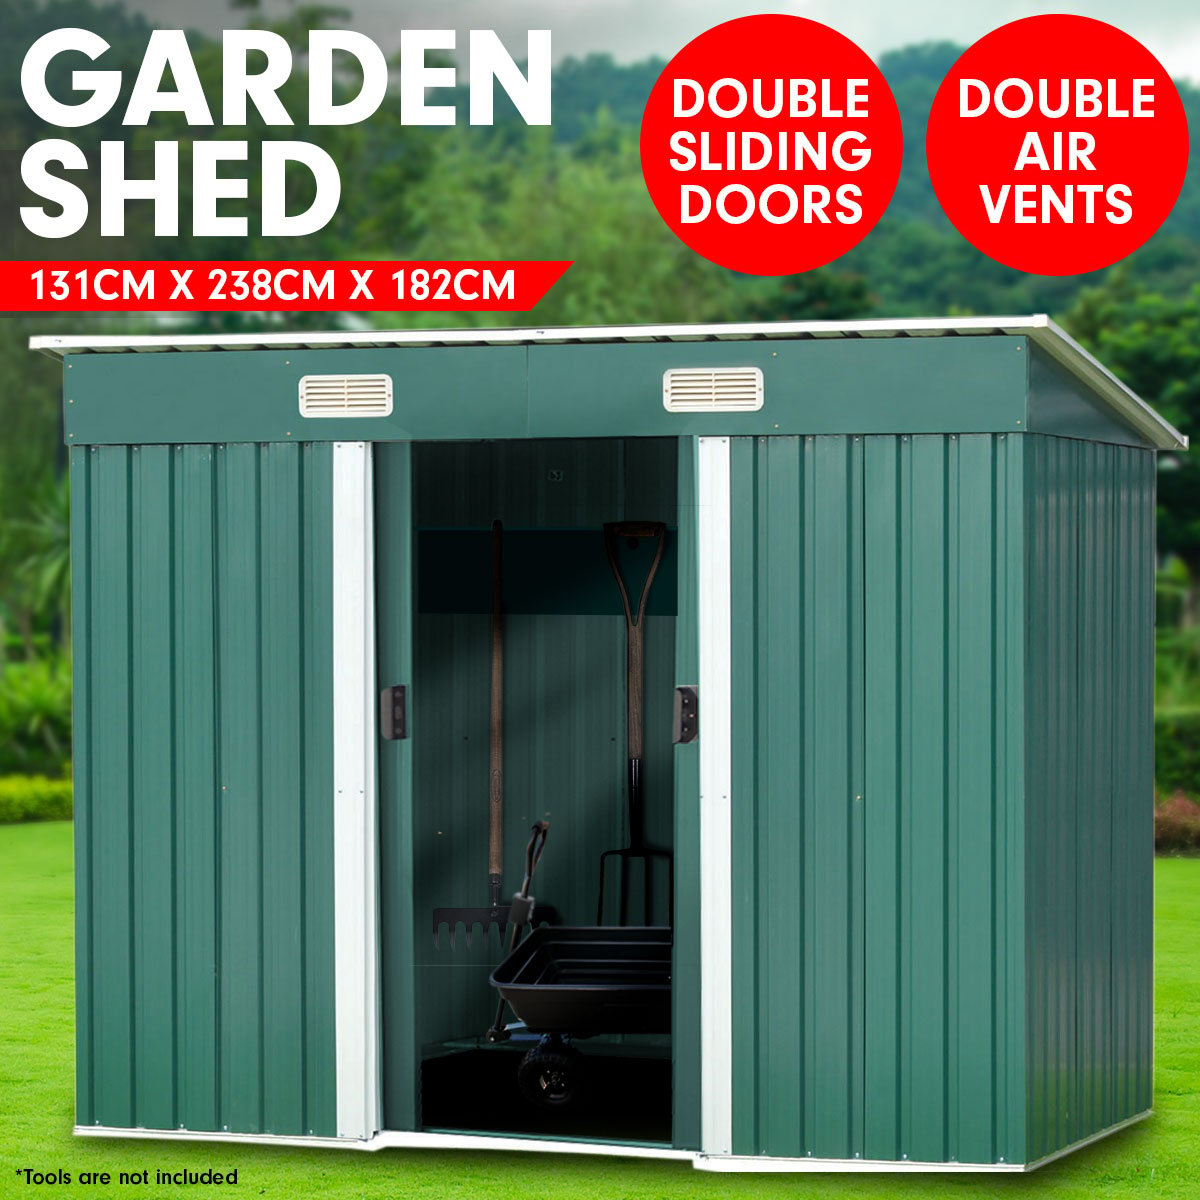 4ft x 8ft Garden Shed Flat Roof Outdoor Storage - Green 1